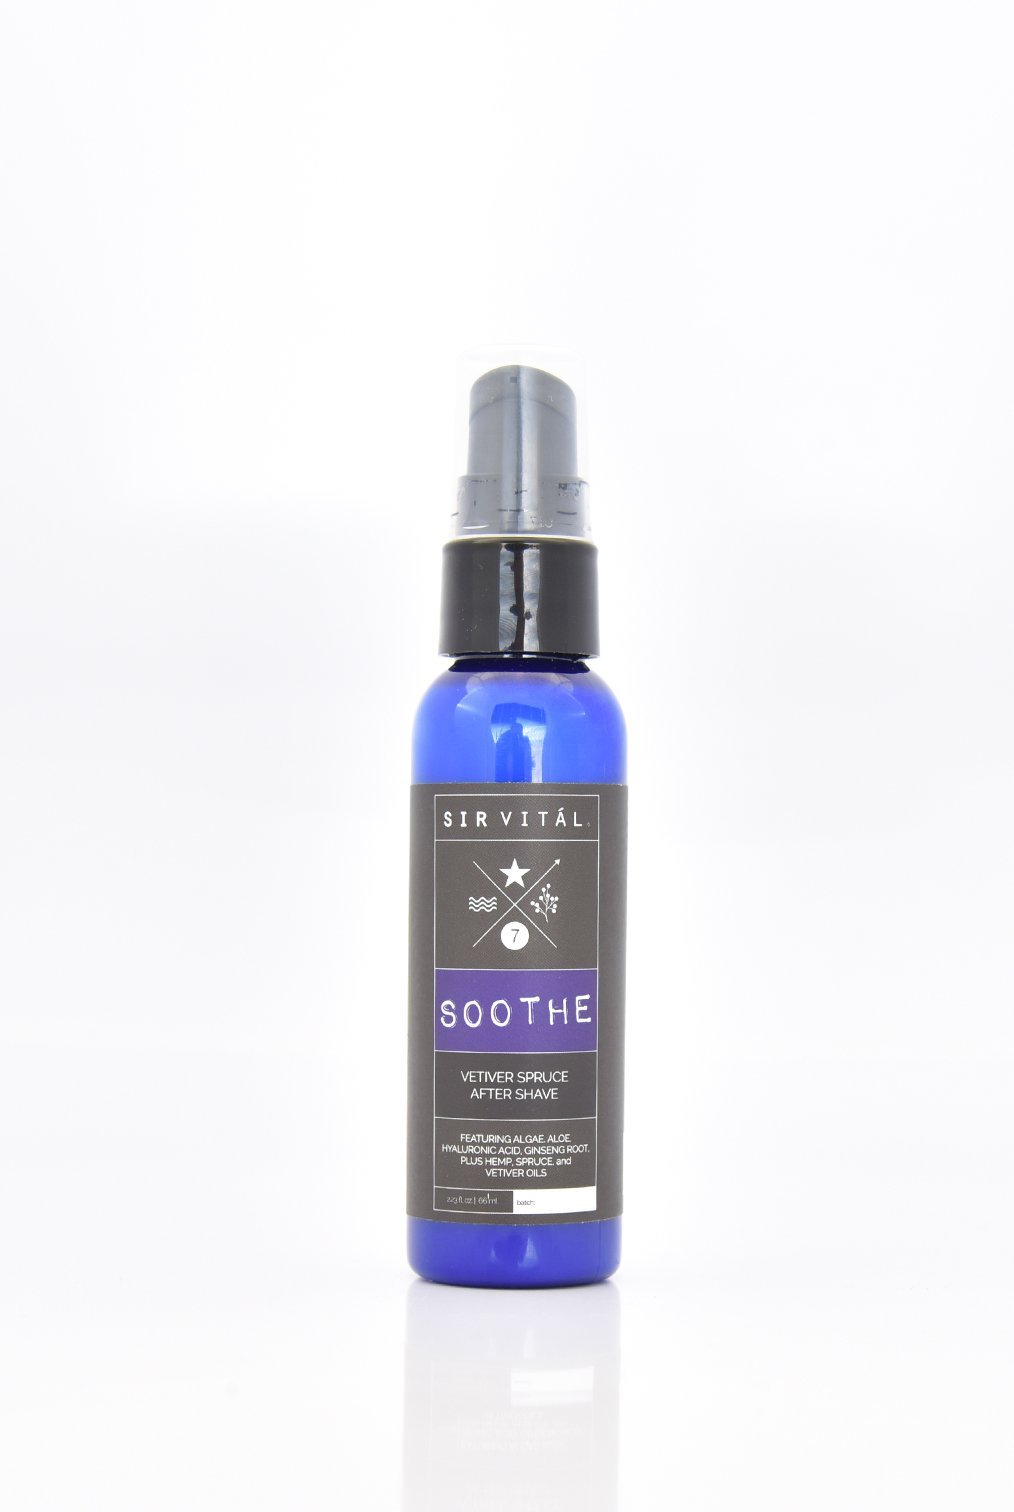 SOOTHE (After Shave) by Sir Vitál - Sanctuary Spa Houston